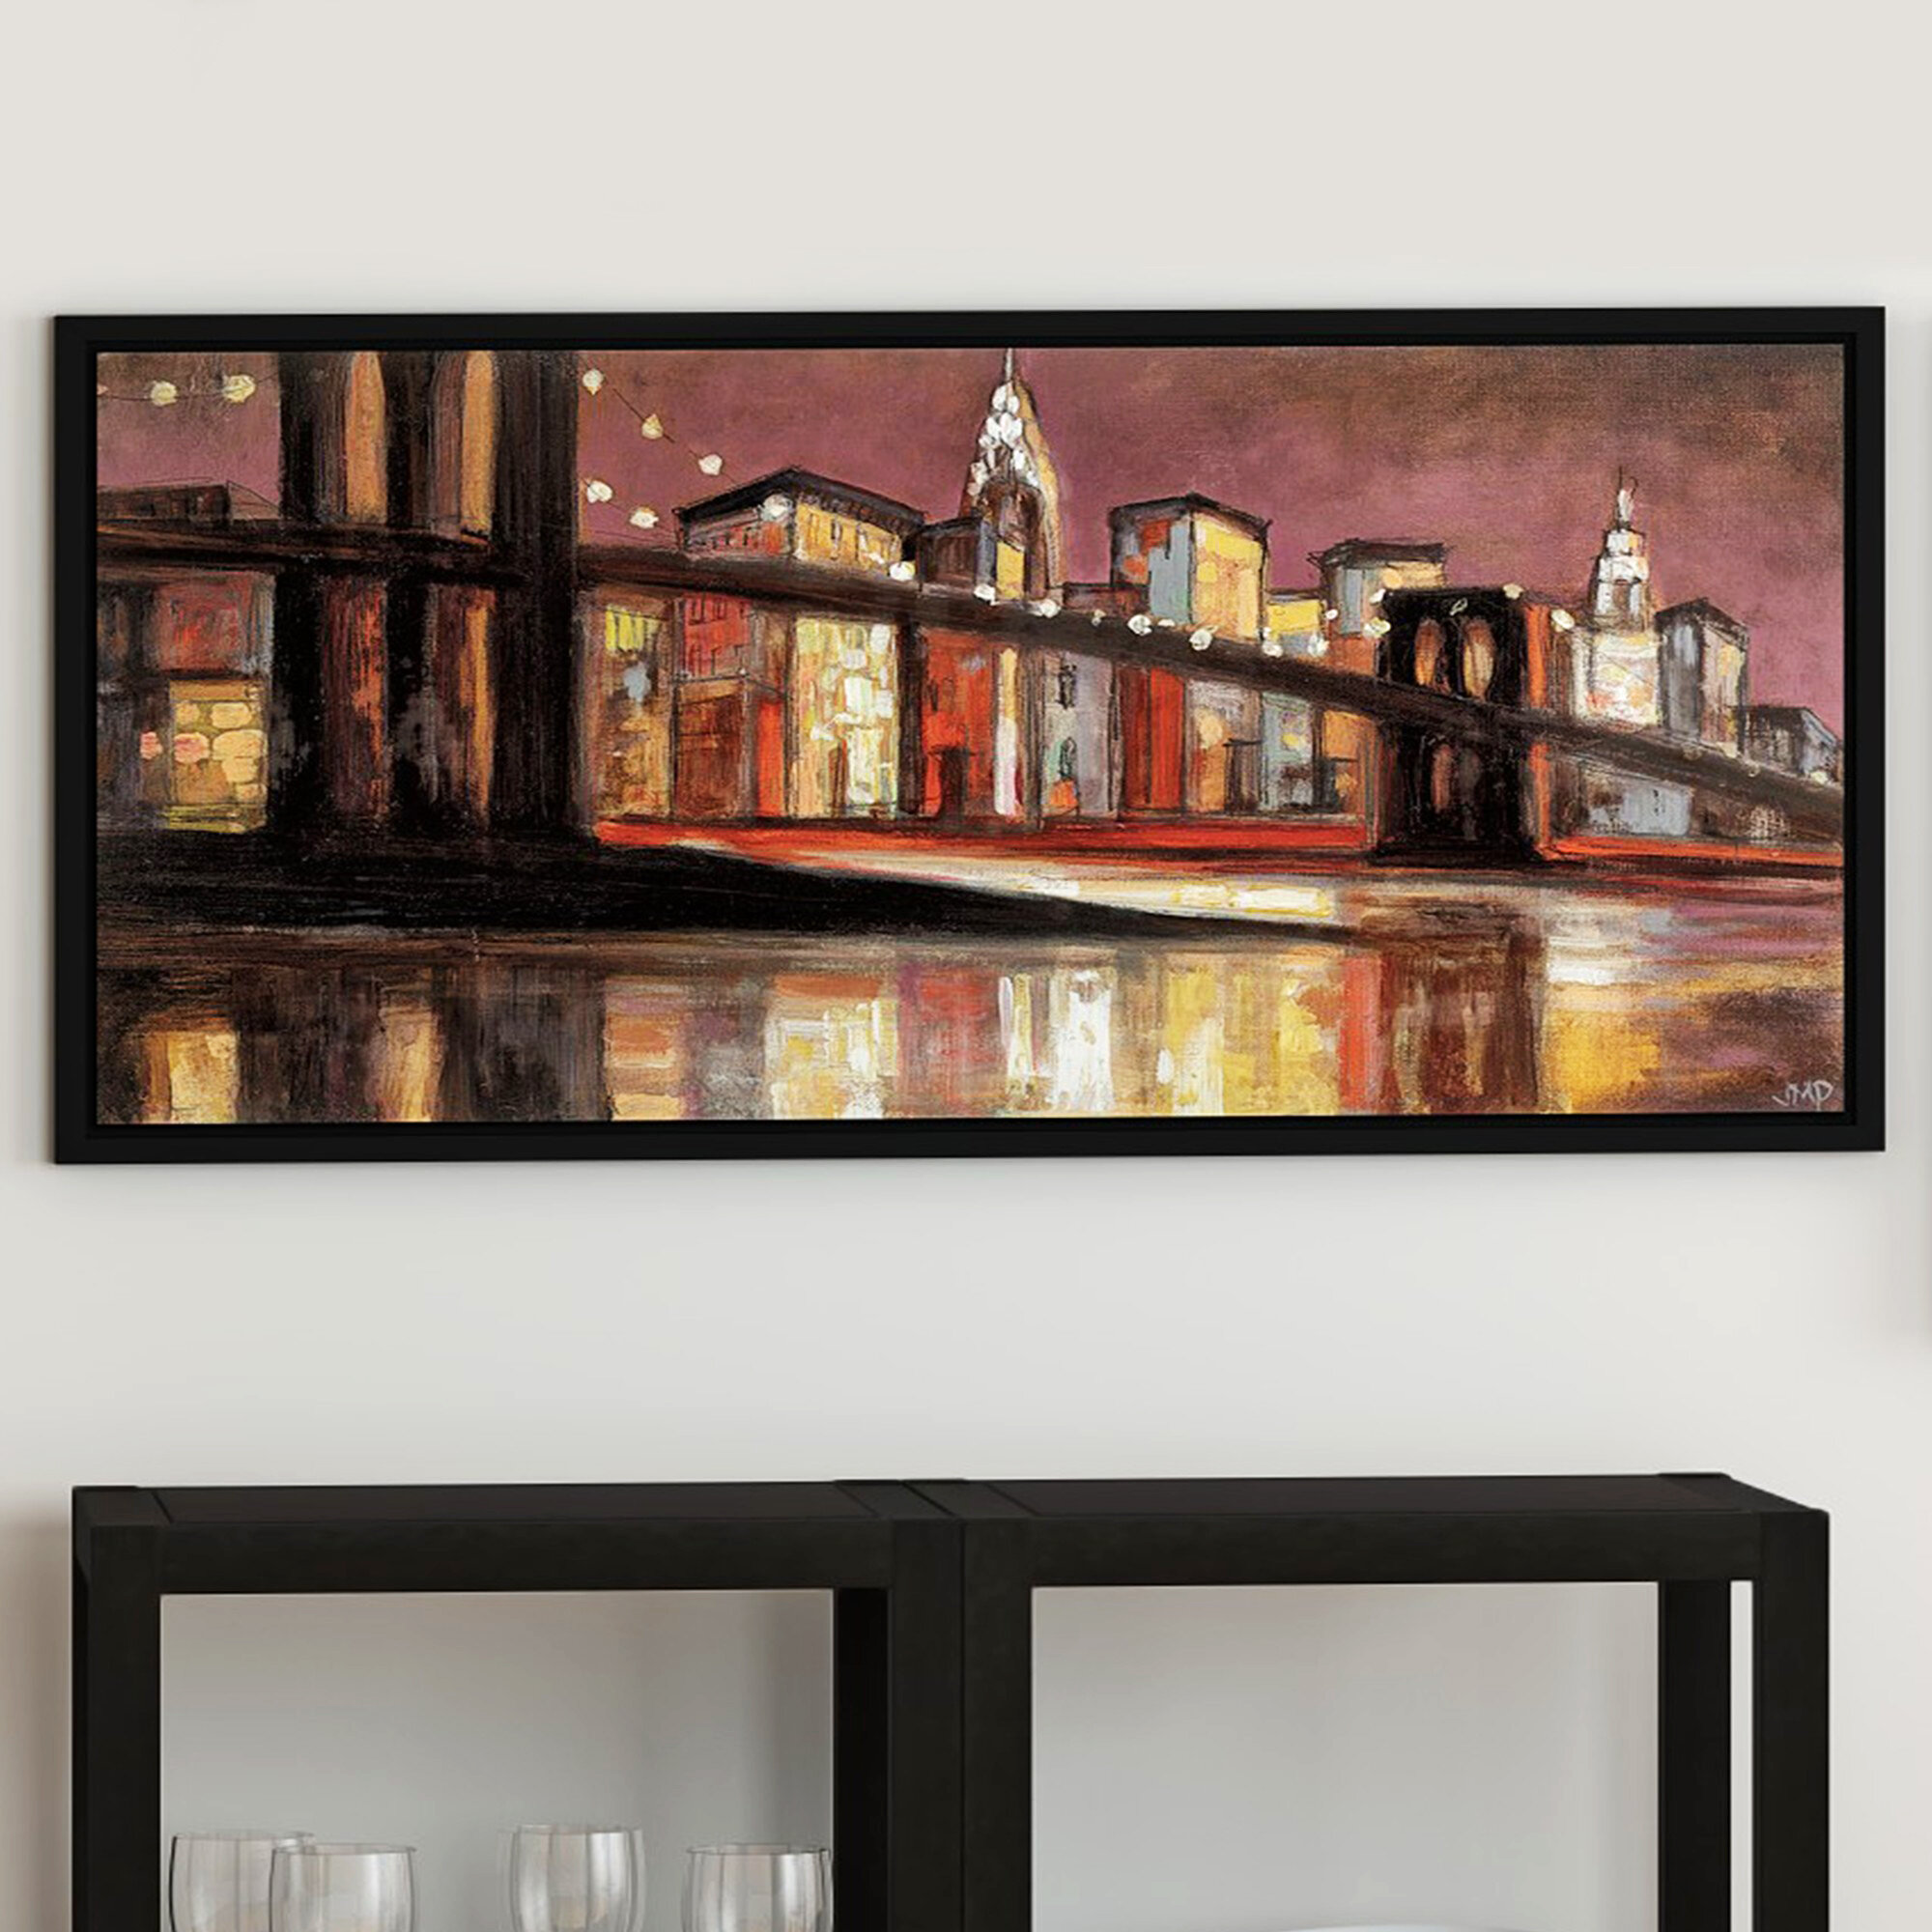 Ebern Designs NYC Nighttime - Picture Frame Print on Canvas & Reviews ...